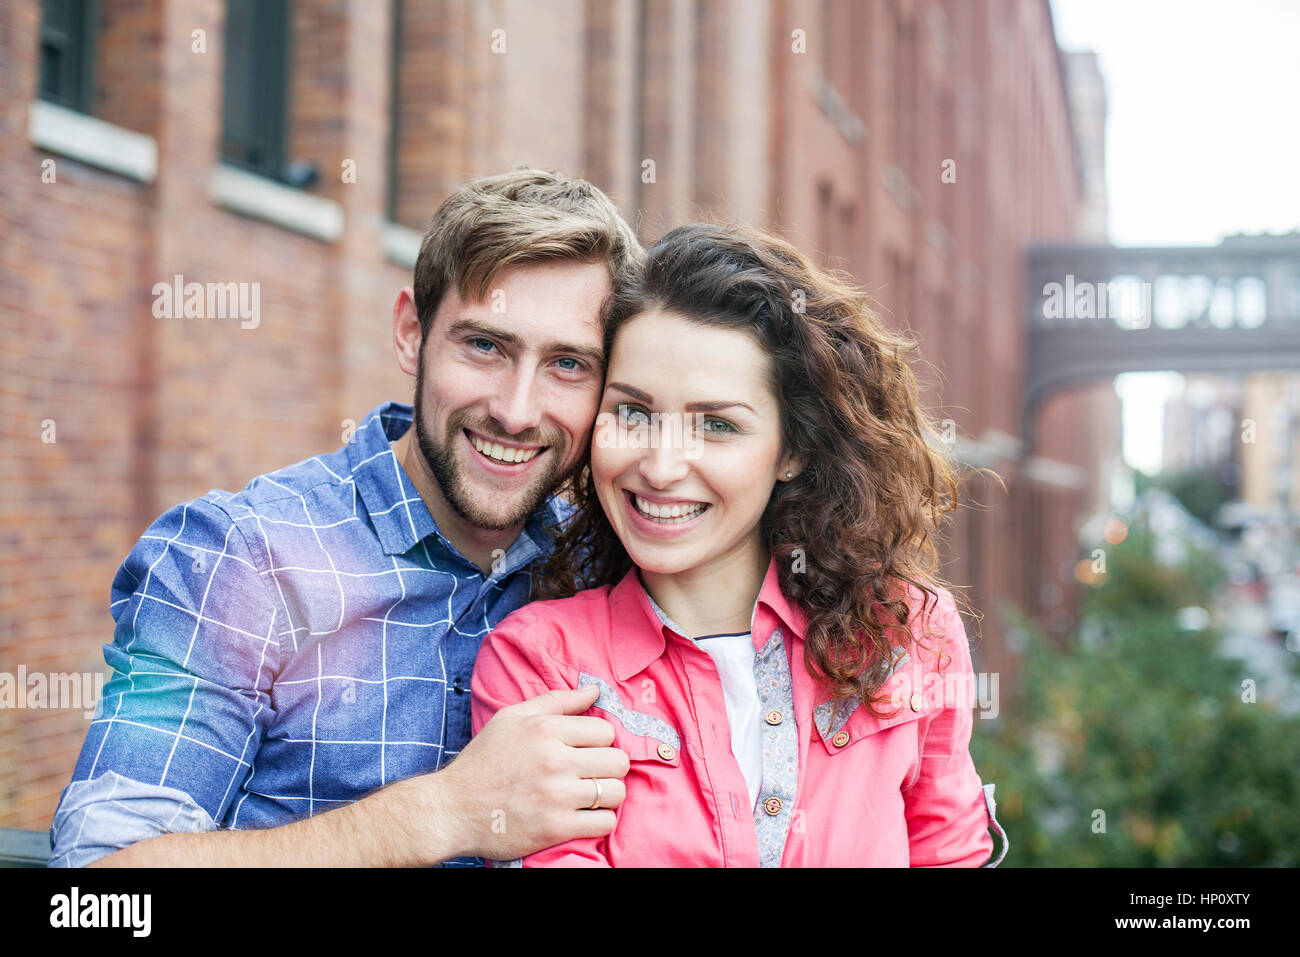 Couple smiling together outdoors, portrait Stock Photo